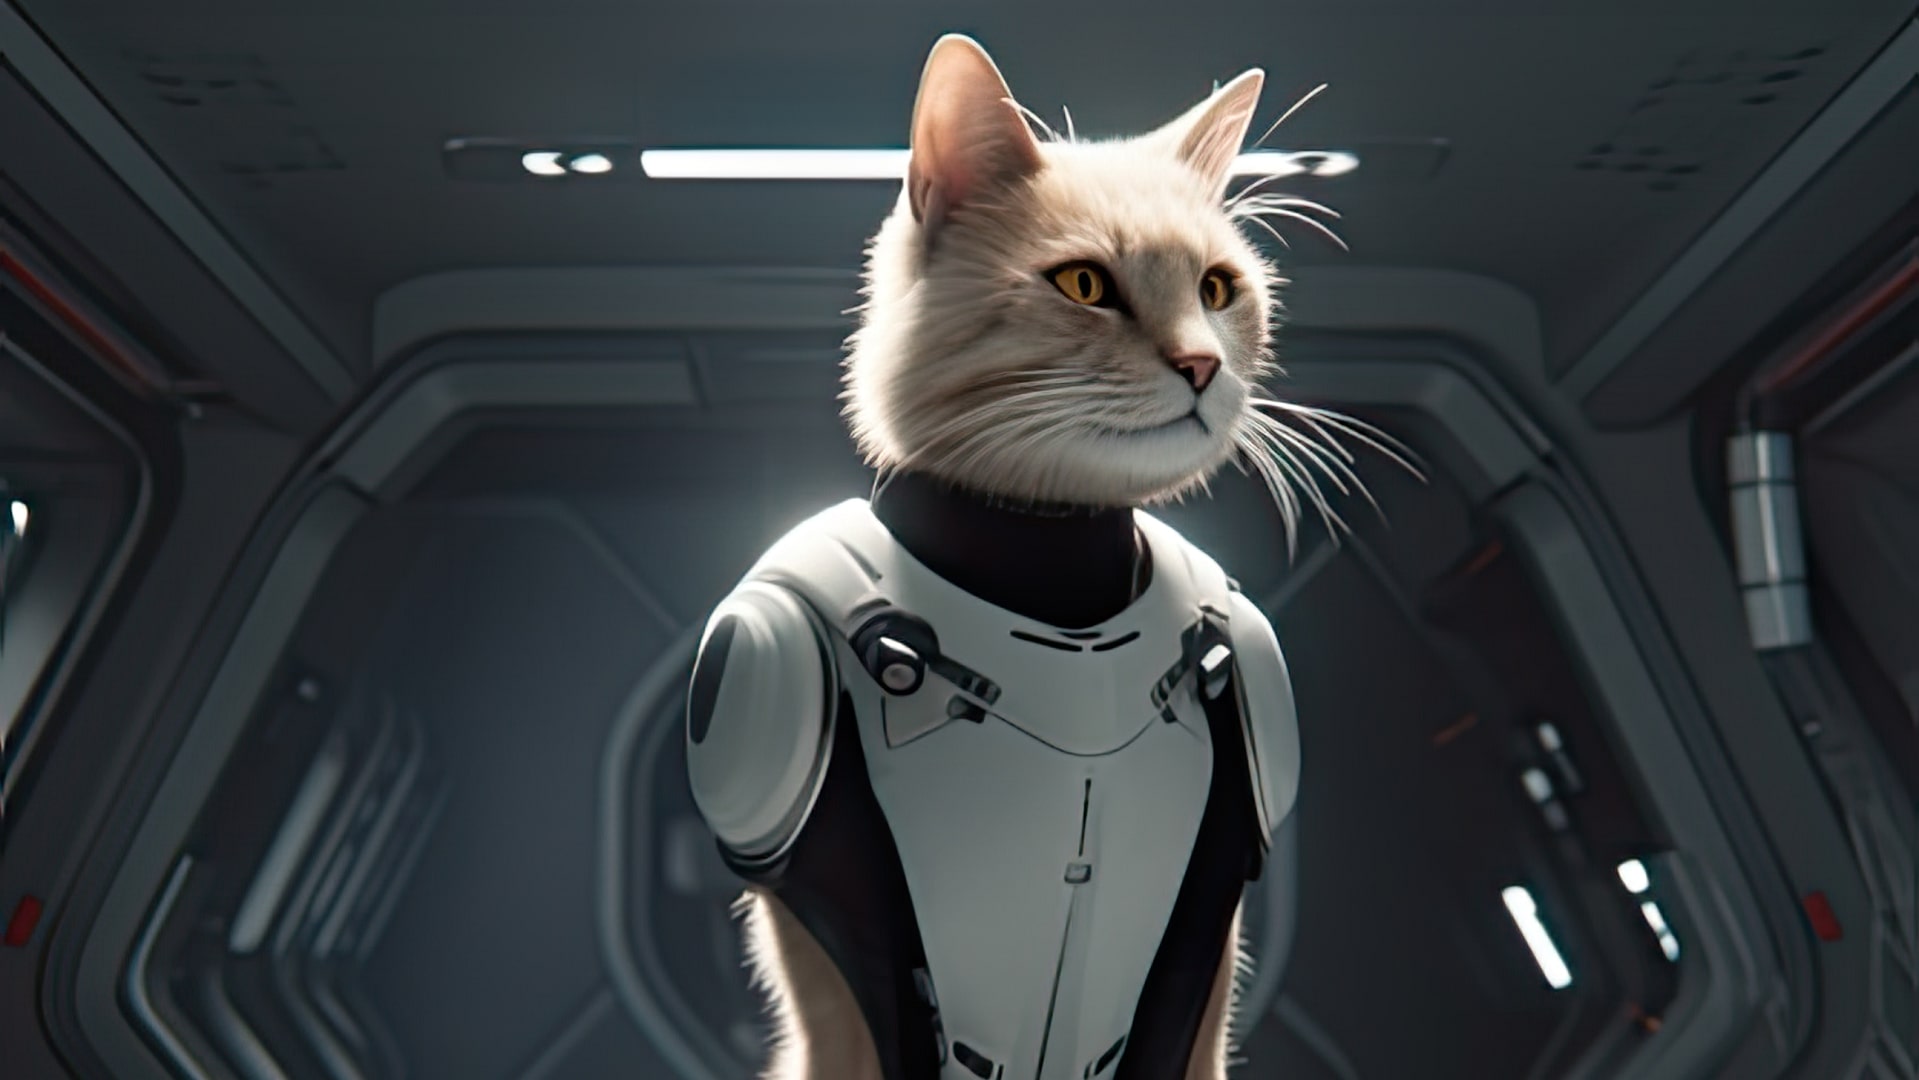 Managing your space cats in Galactic Civilizations IV: Supernova